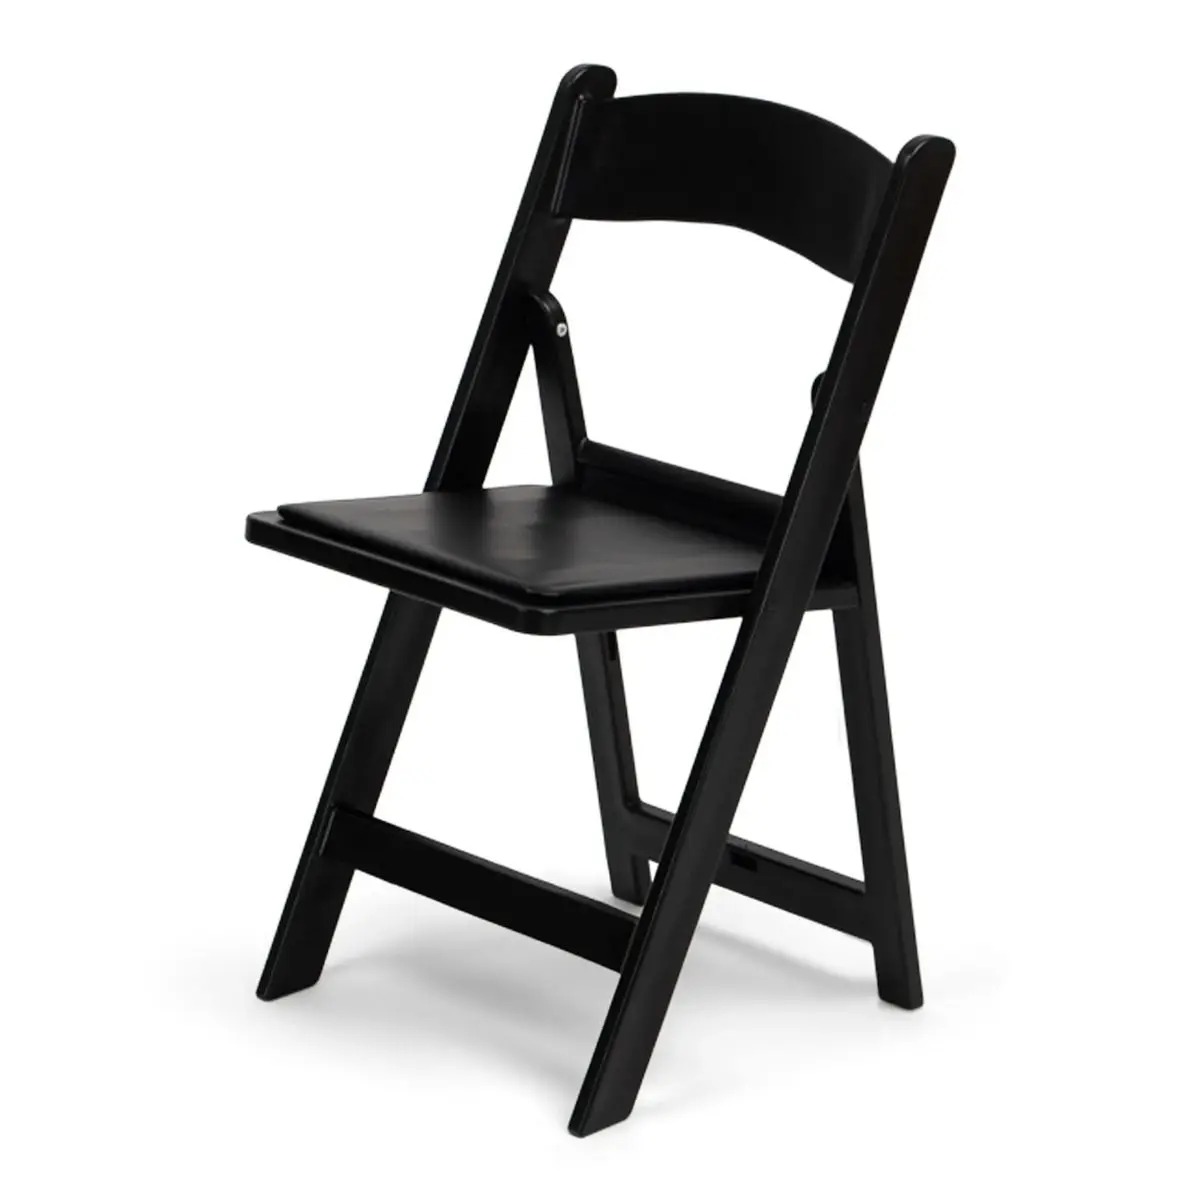 Resin black folding chair with padded seat